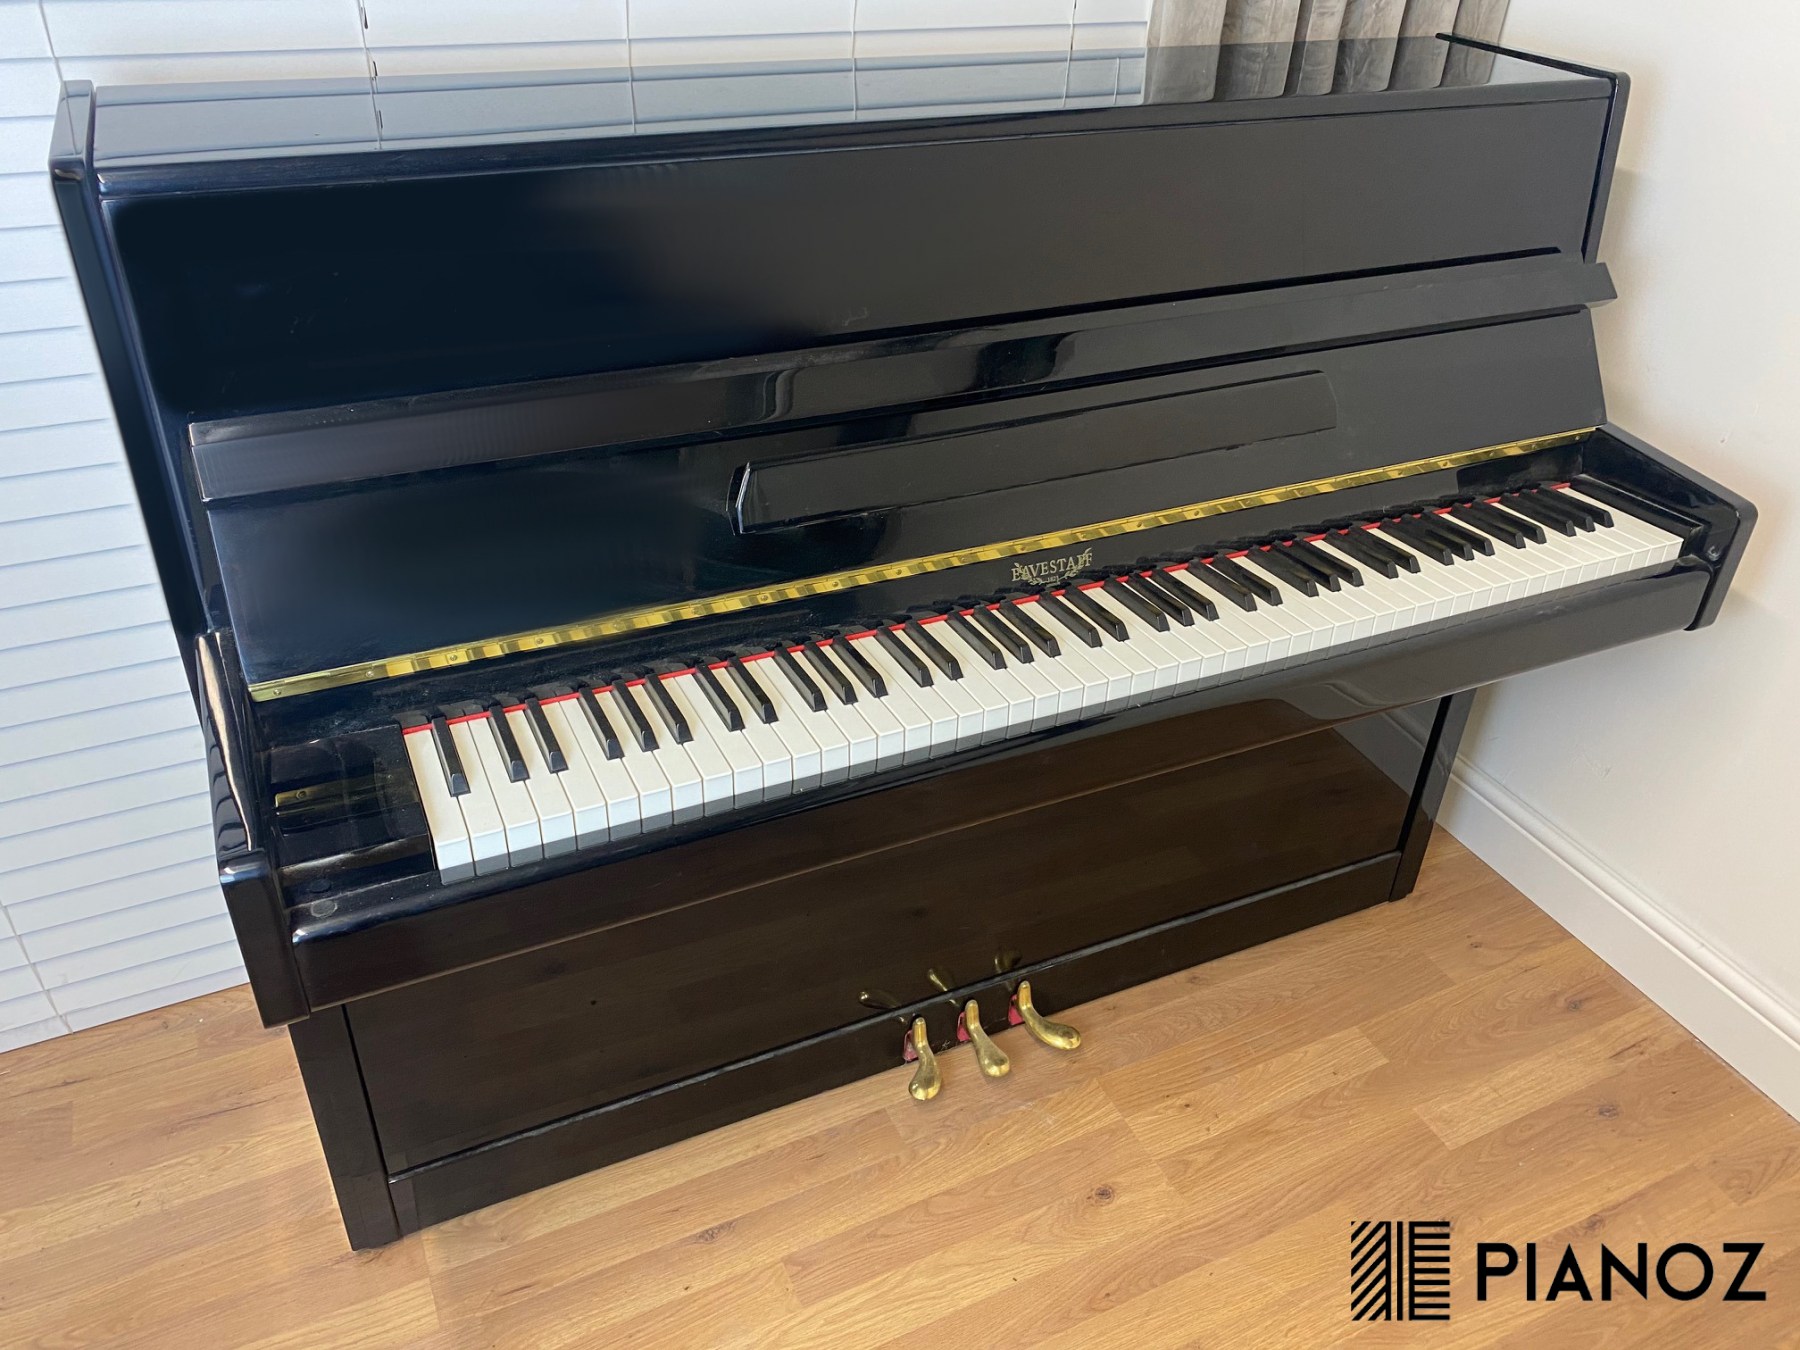 Eavestaff 108 Black Upright Piano piano for sale in UK